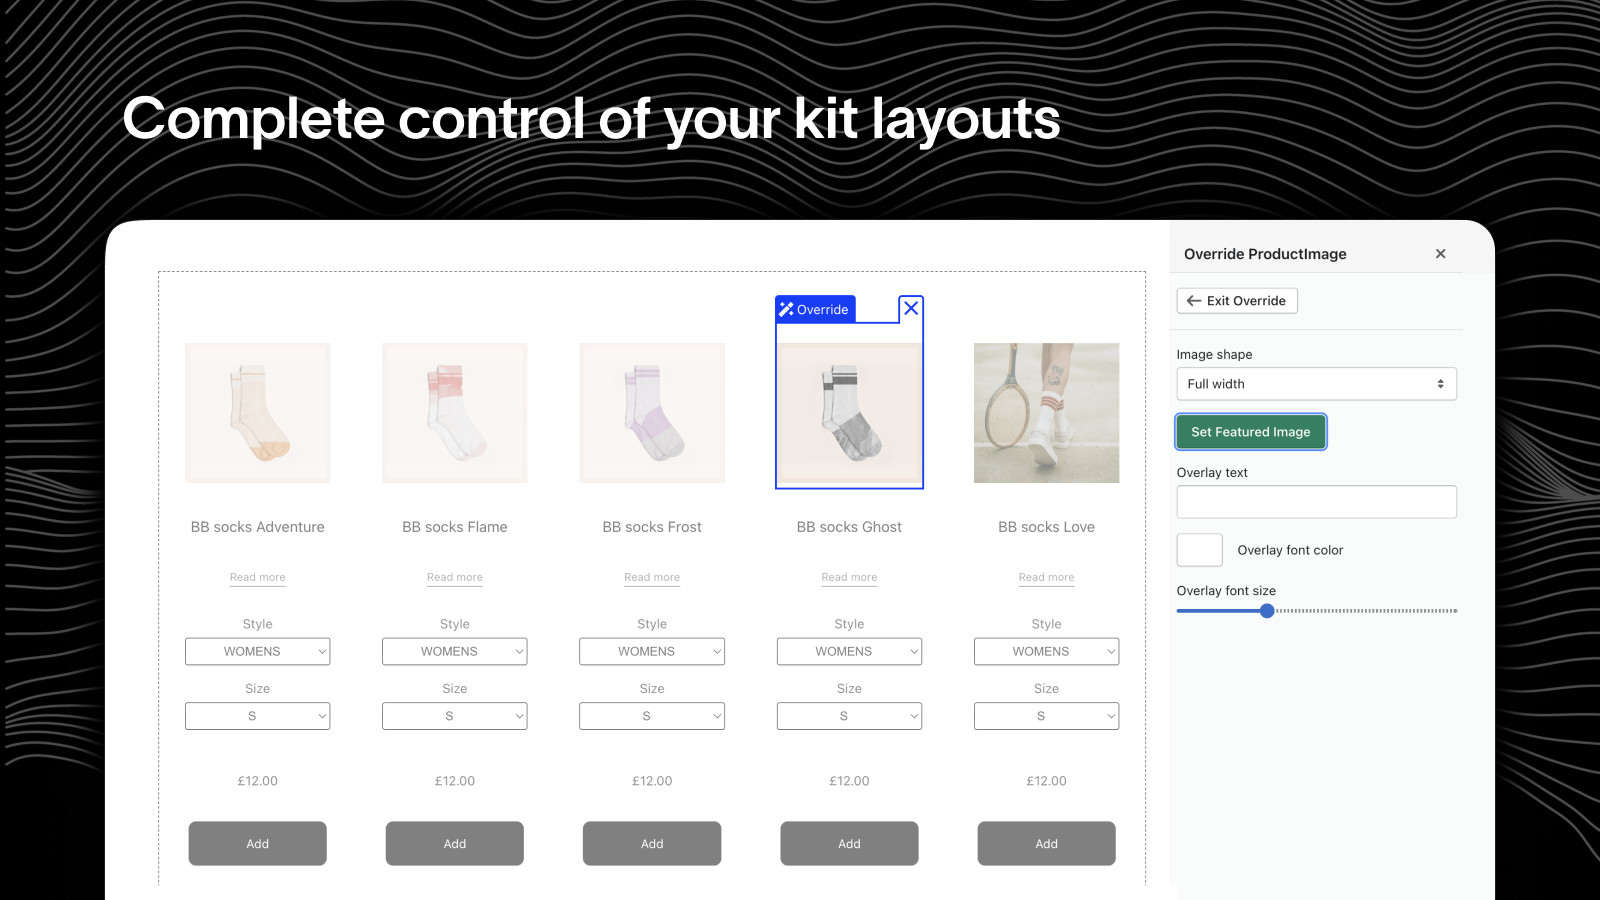 Complete control of your kit layouts